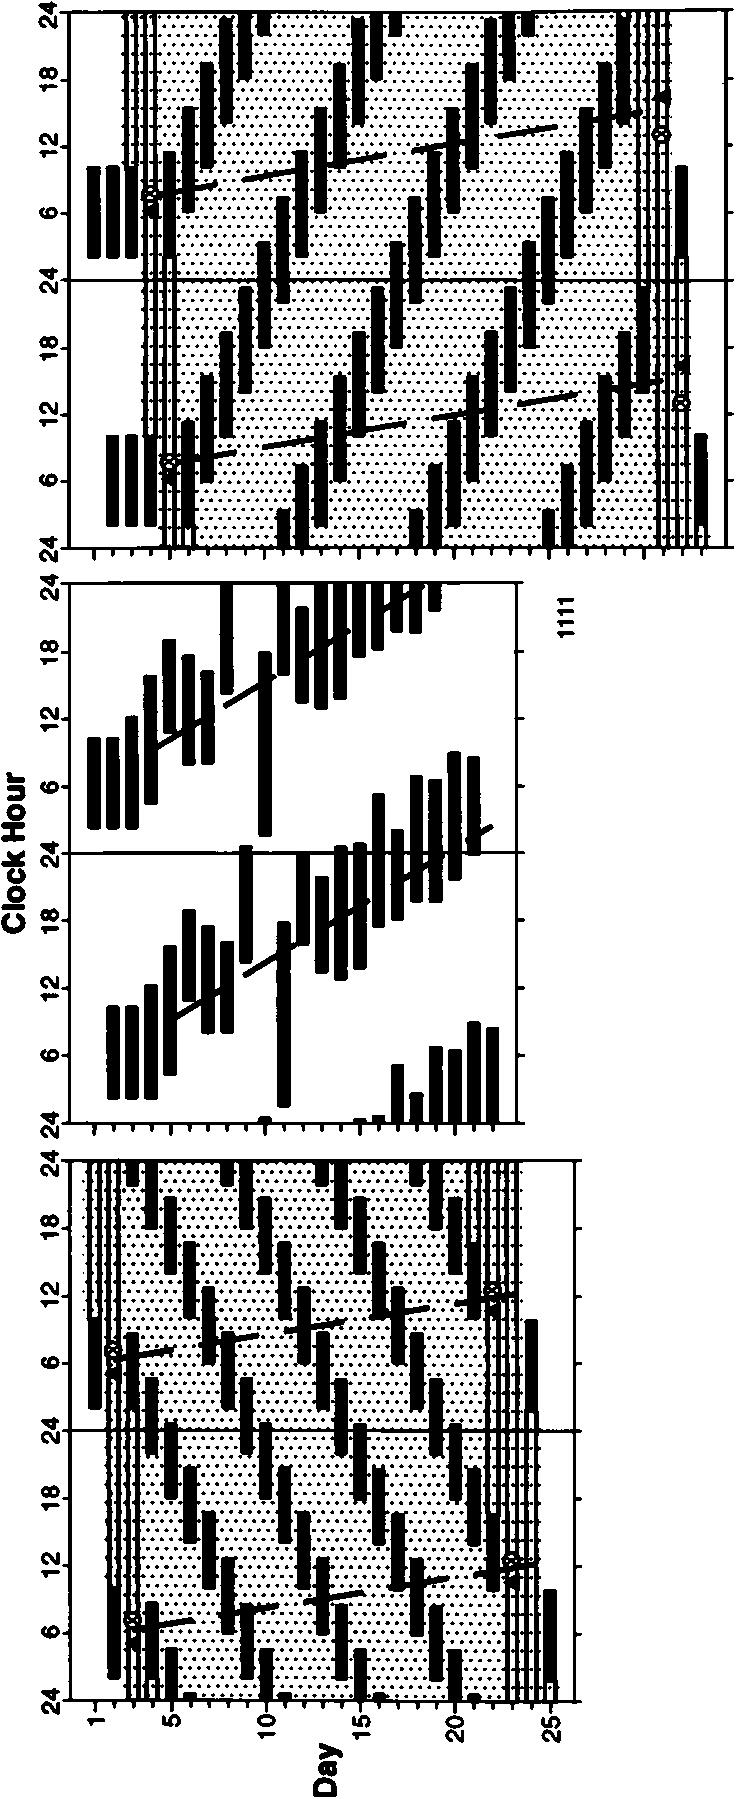 288 LAVIE Figure 2 Experimental results of a 22-year old subject who was investigated in the time-free environment 3 times: twice with the forced desychrony paradigm when on a 20 h day (left panel ),